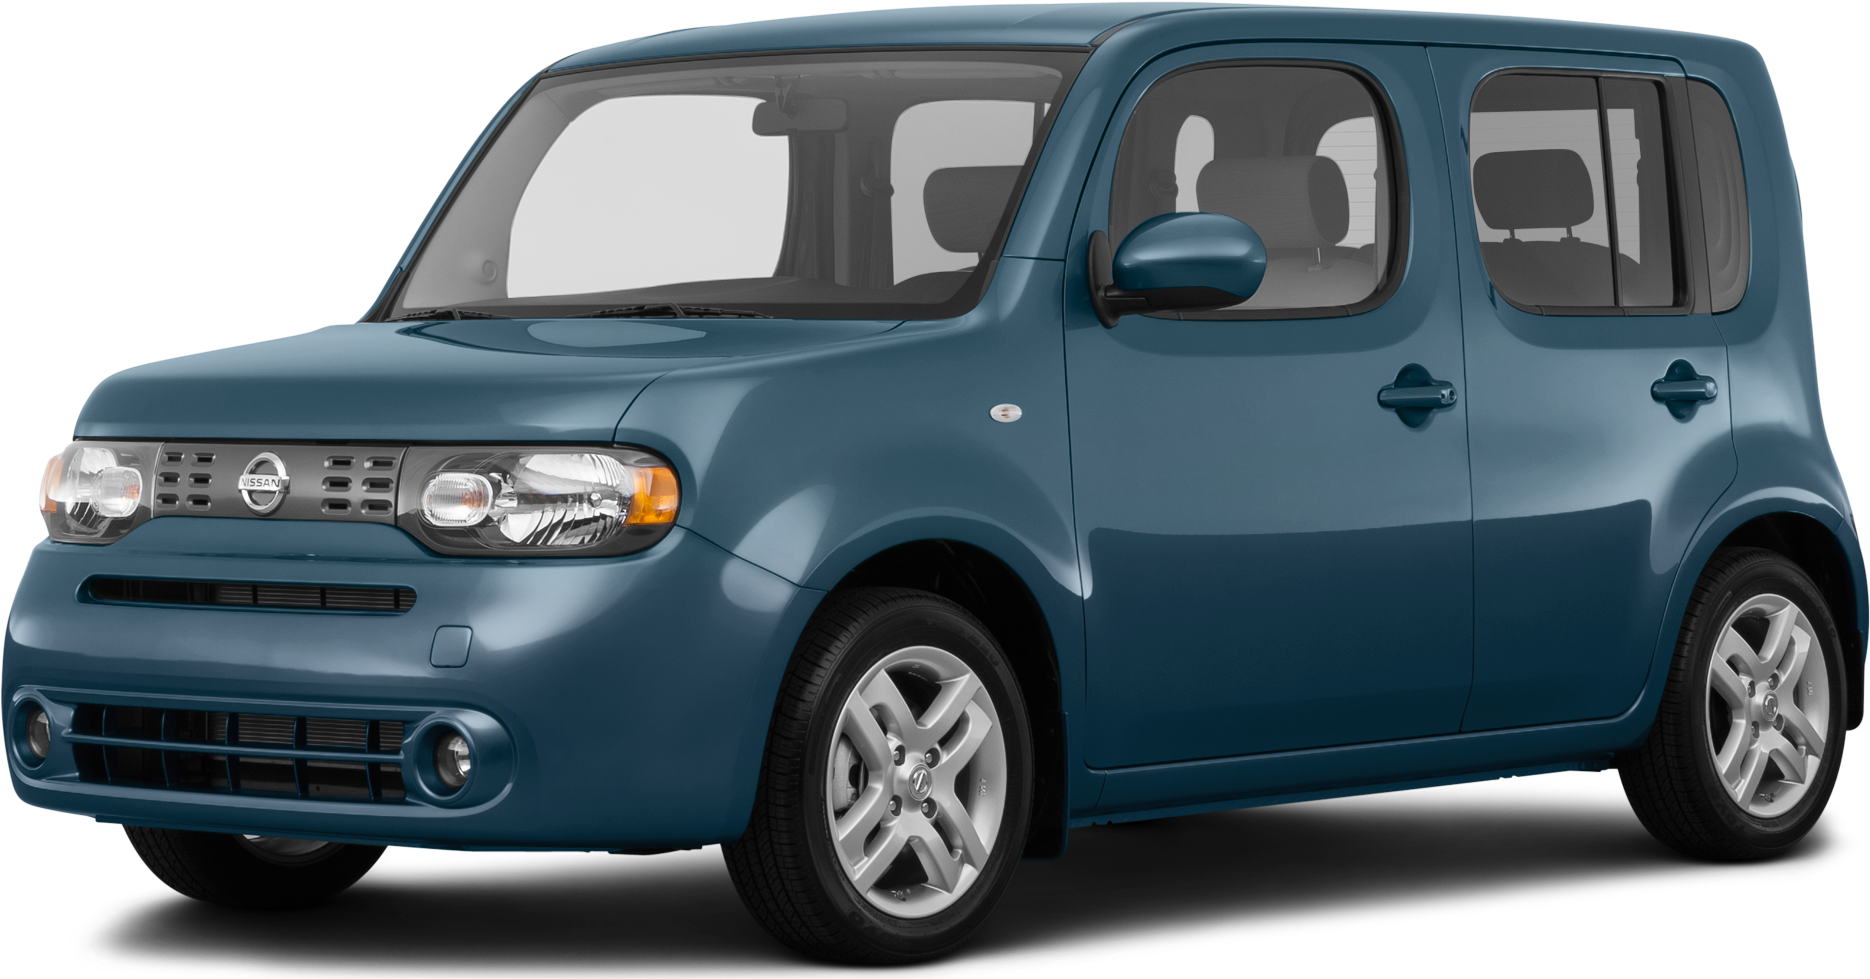 2014 Nissan cube Price, Value, Ratings & Reviews Kelley Blue Book